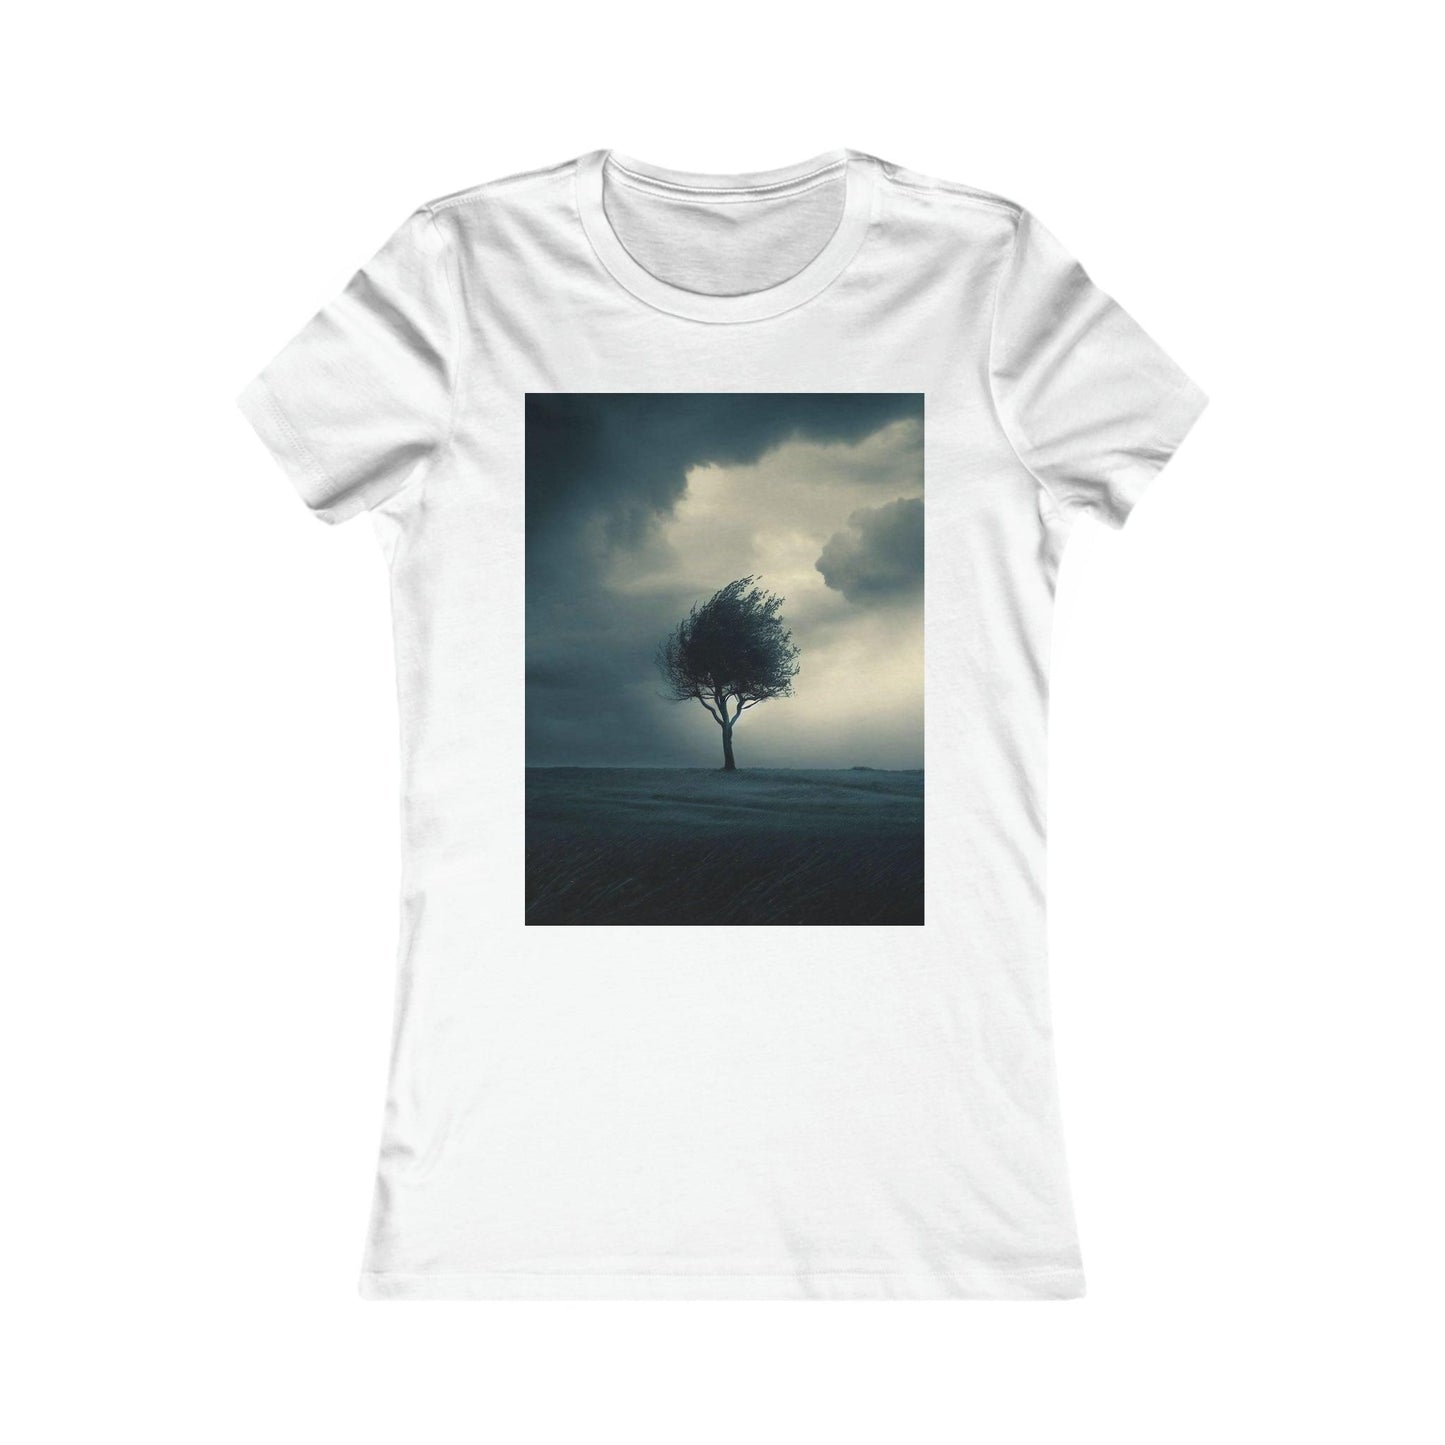 Black/White Tee - Tree standing long ..in storm so strong ! ... (USA) - e-mandi